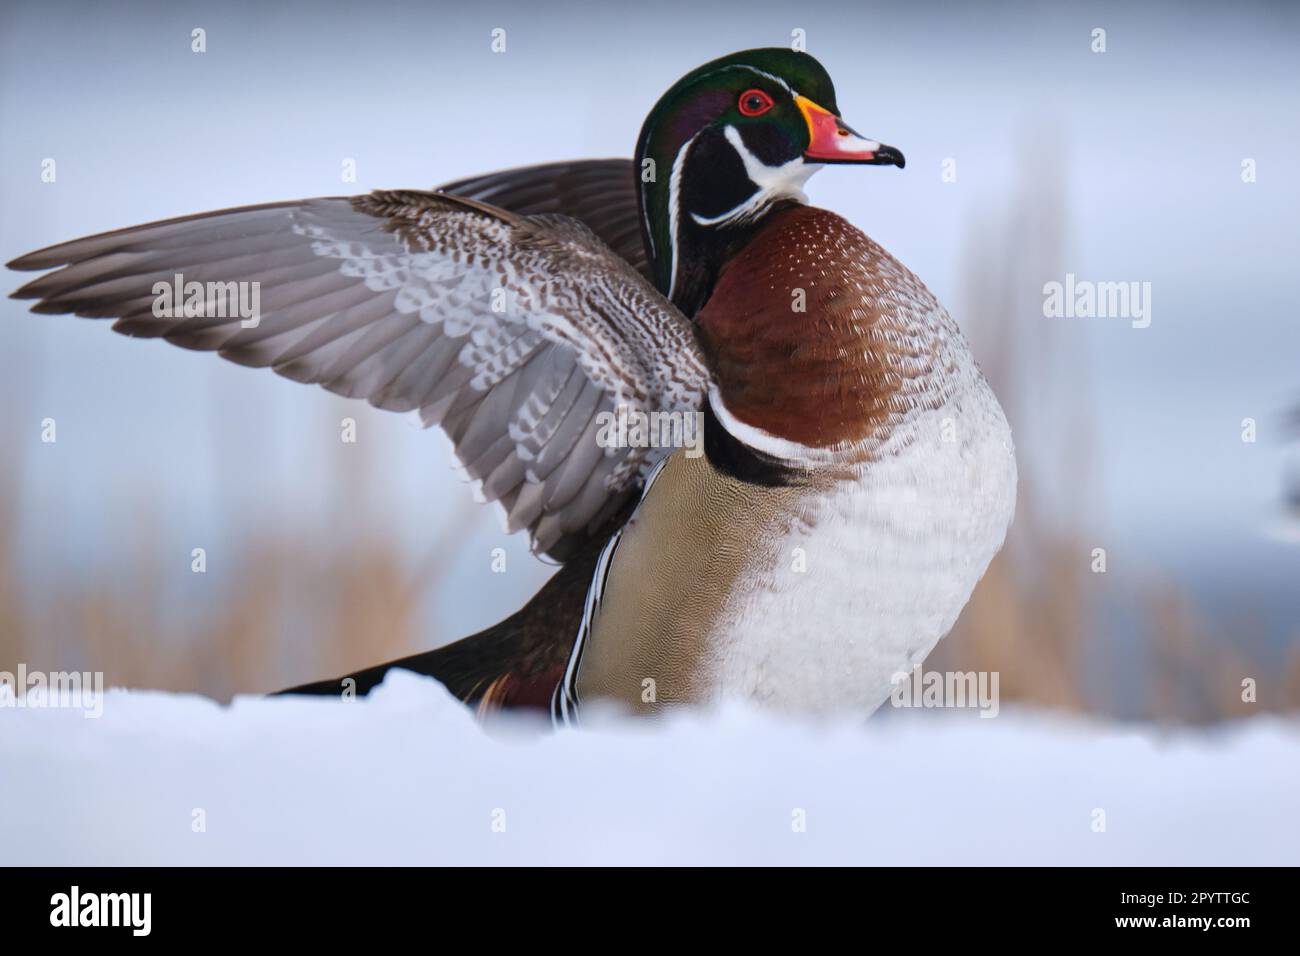 Male wood duck, Aix Sponsa, during winter in snow, displaying wings wide open Stock Photo